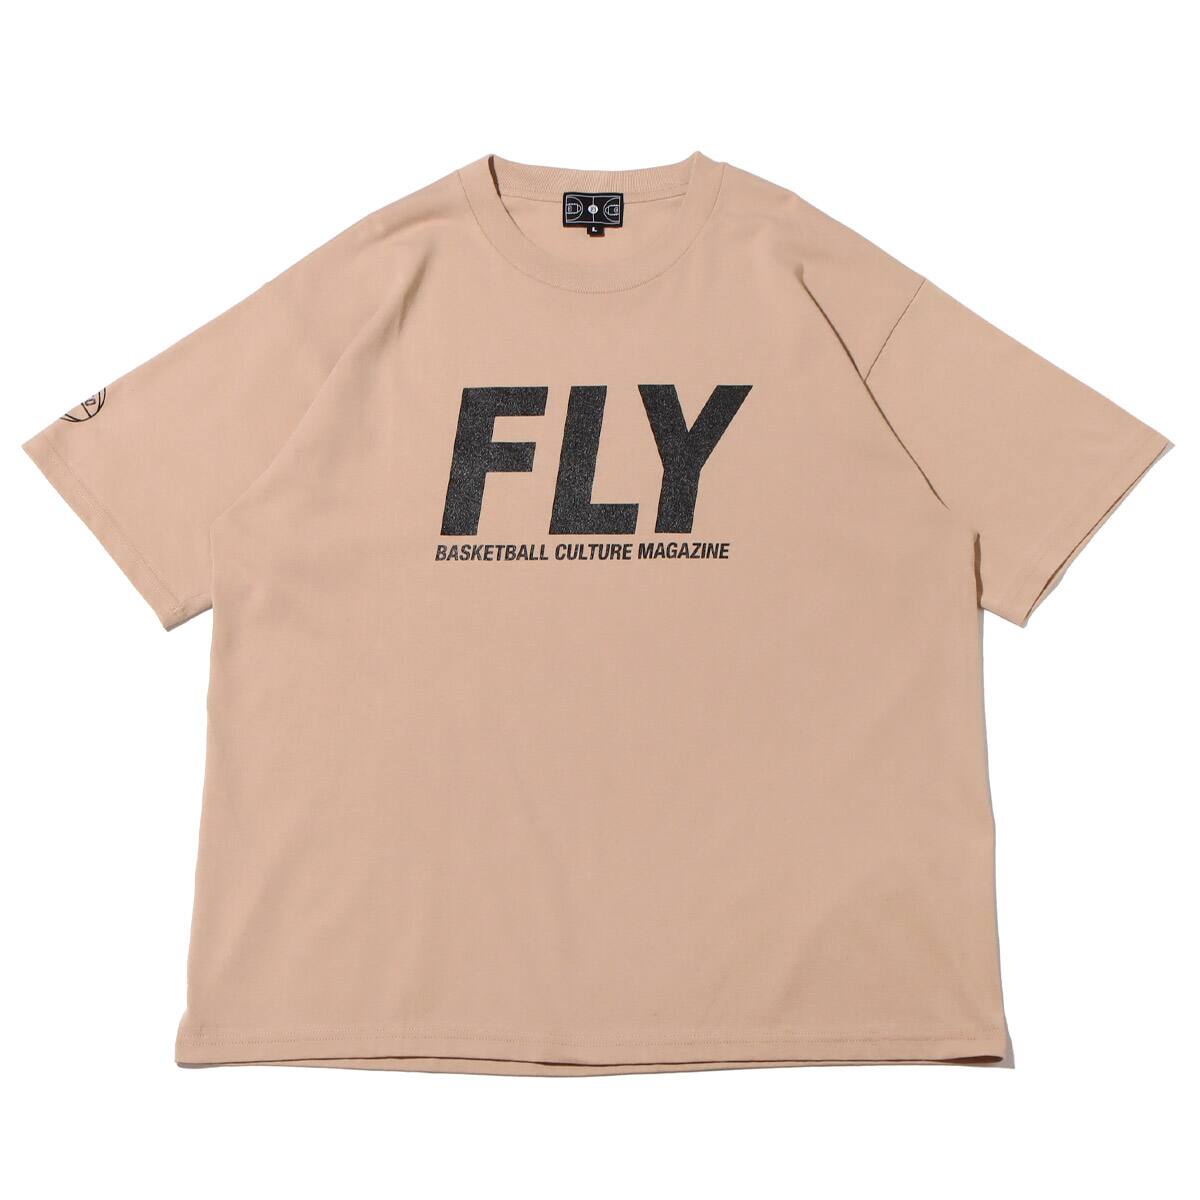 TOKYO 23 x FLY BASKETBALL CULTURE MAGAZINE TEE BEIGE 22FW-S_photo_large